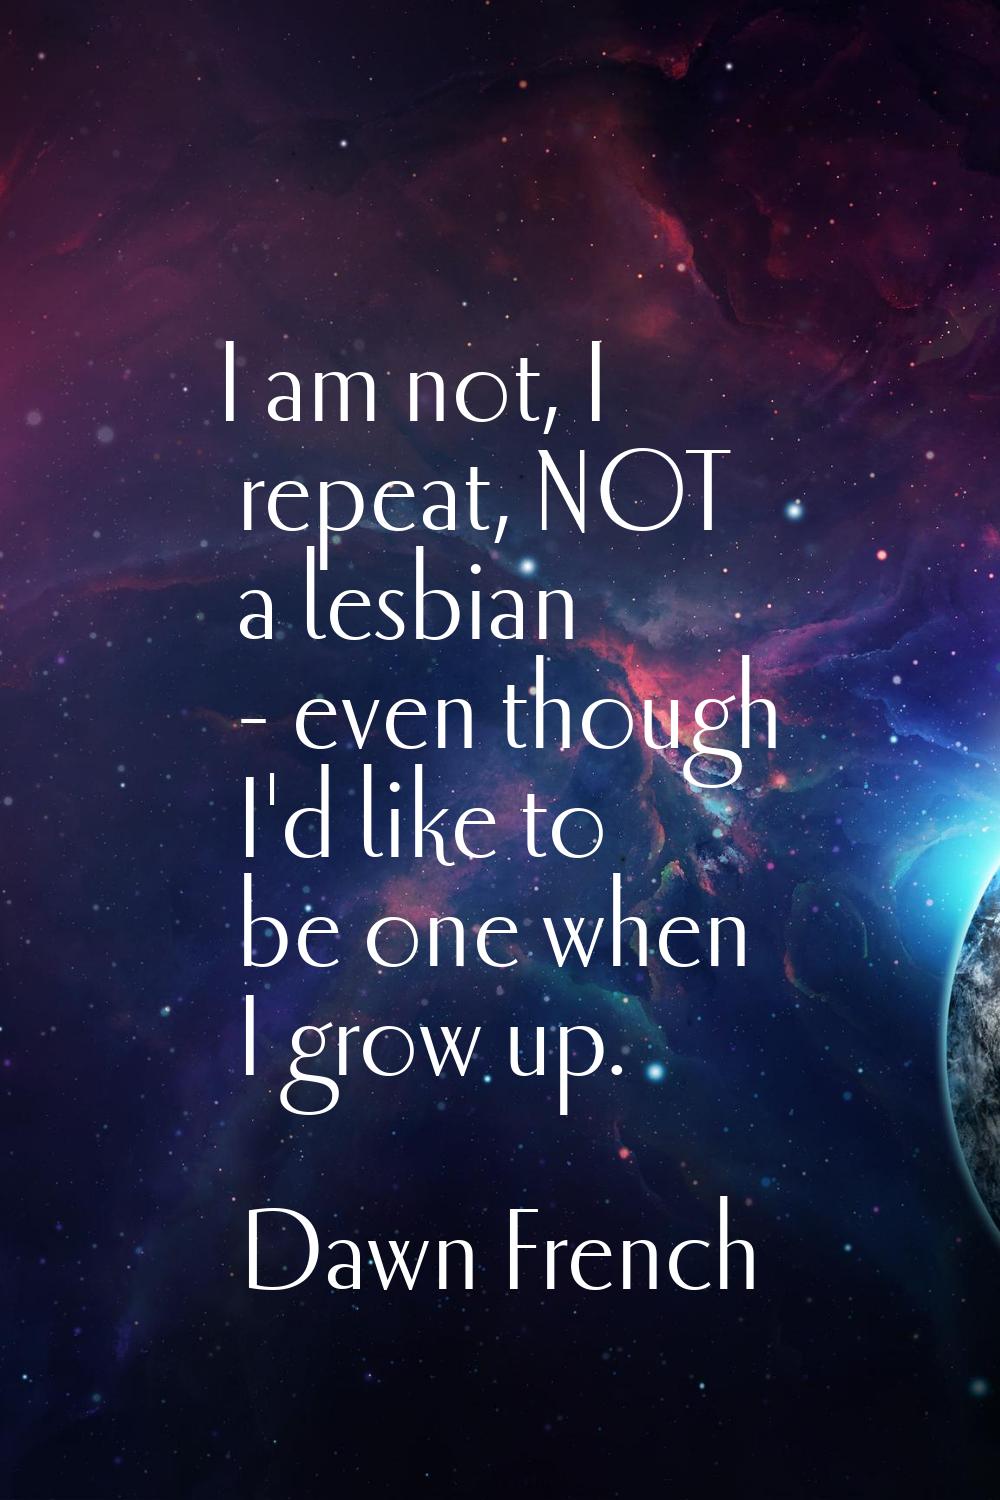 I am not, I repeat, NOT a lesbian - even though I'd like to be one when I grow up.